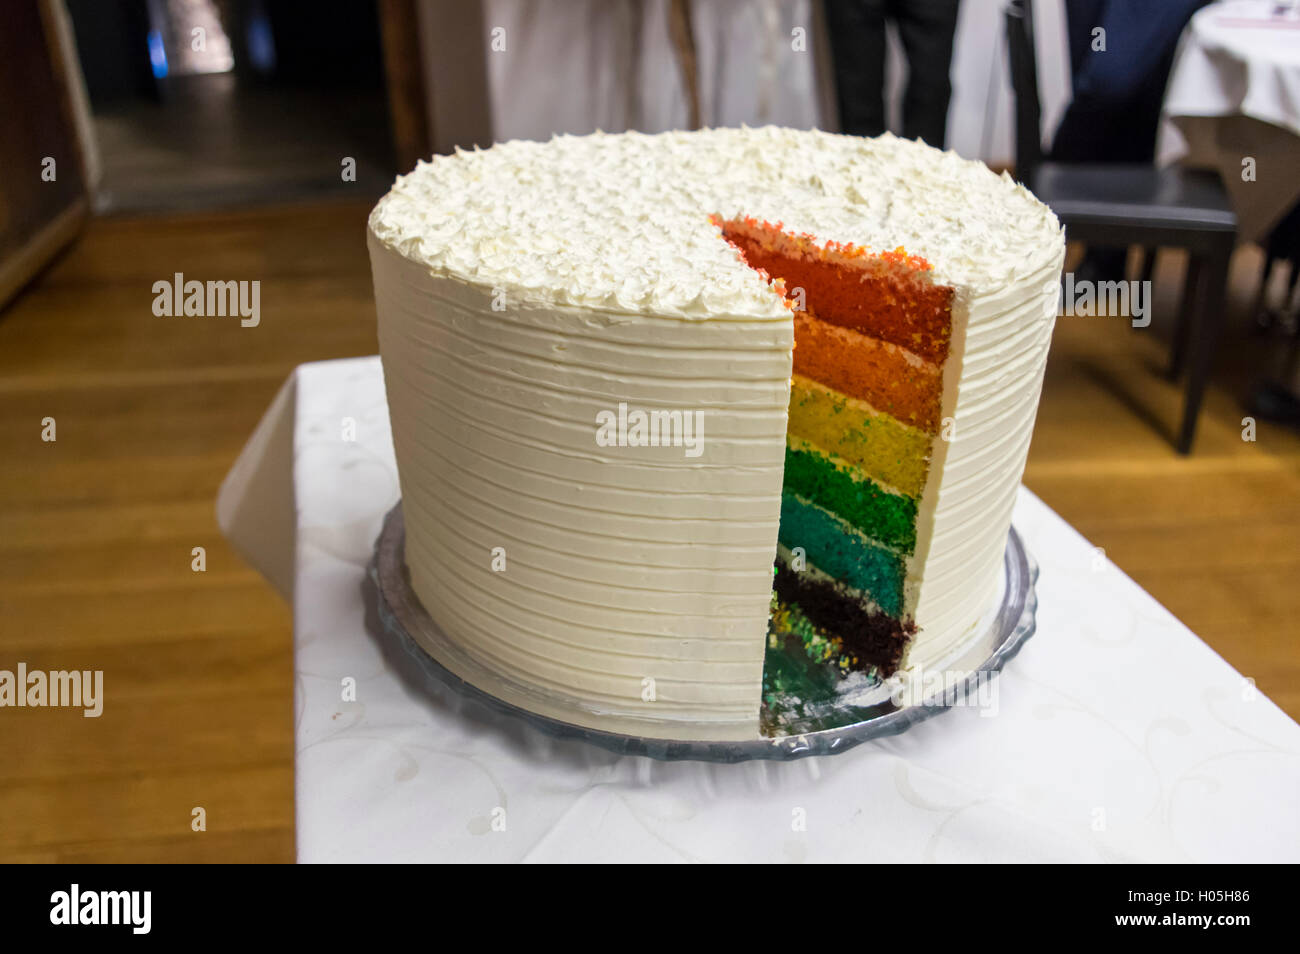 Colorado Wedding Cake Case Appears Before SCOTUS | Time